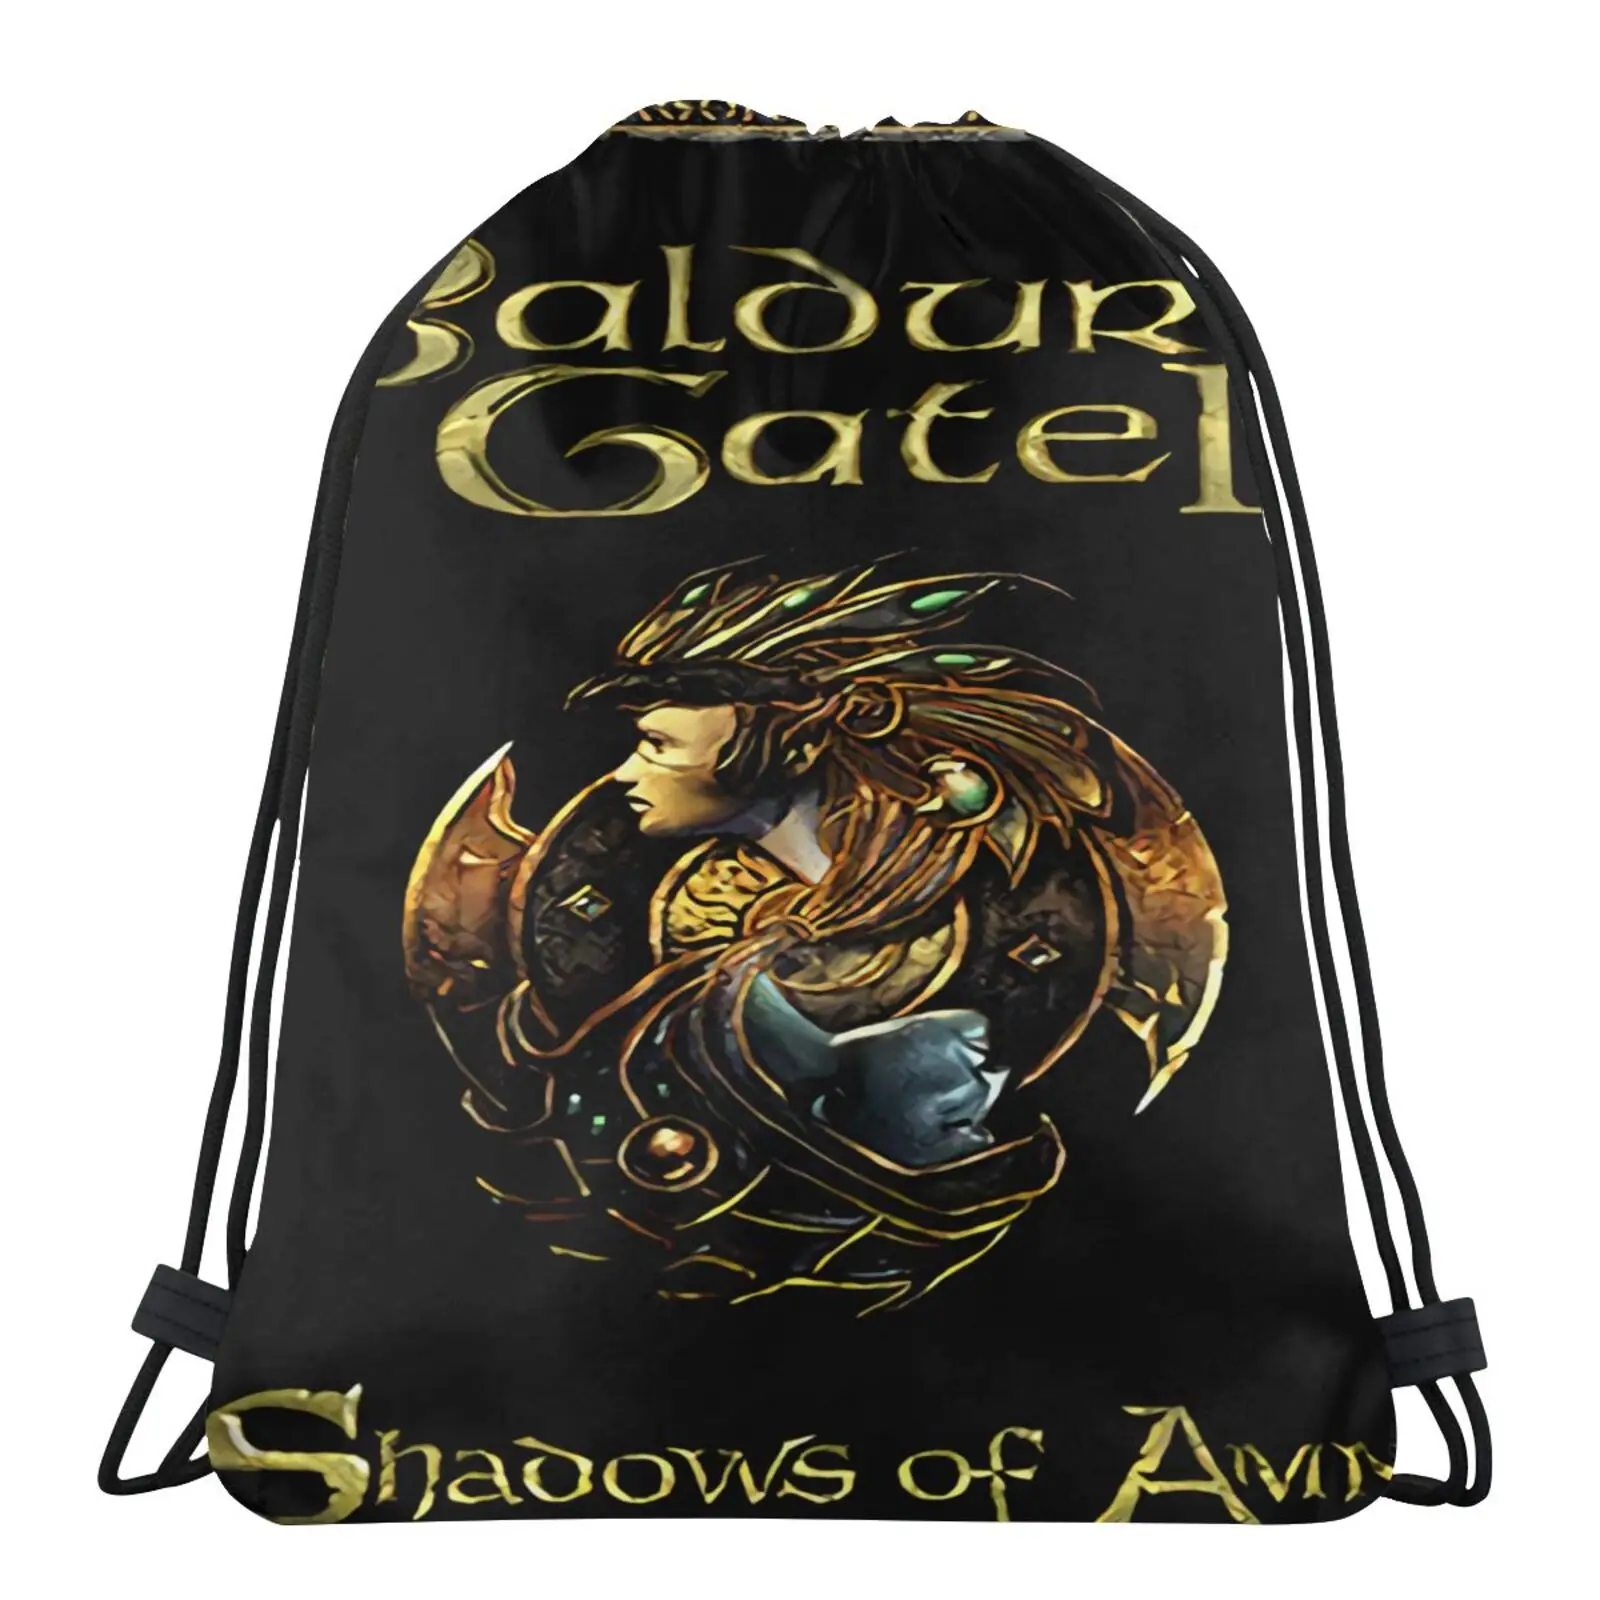 

Baldurs Gate Ii Shadows Of Amn Bag Small Fabric Bag Package Suitcases Cloth Backpack Physical Culture Bag Packing Bag Hip Sack